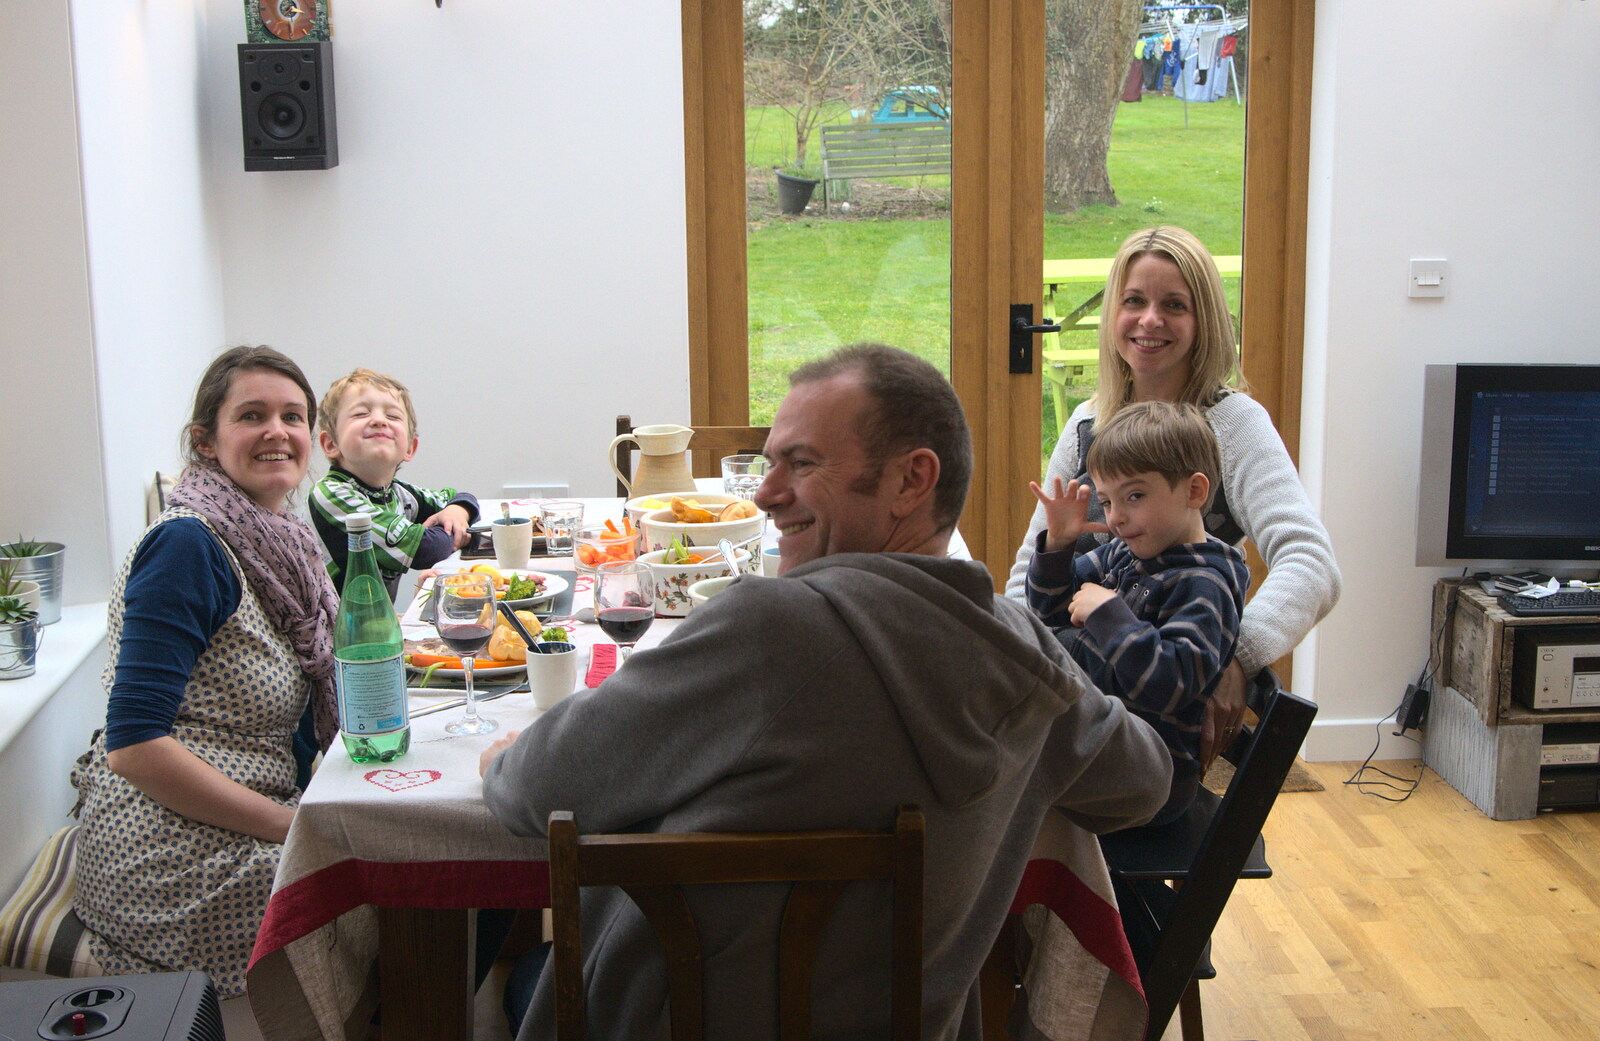 Sunday lunch in the back room from A Crashed Car and Greenhouse Demolition, Brome, Suffolk - 20th March 2015